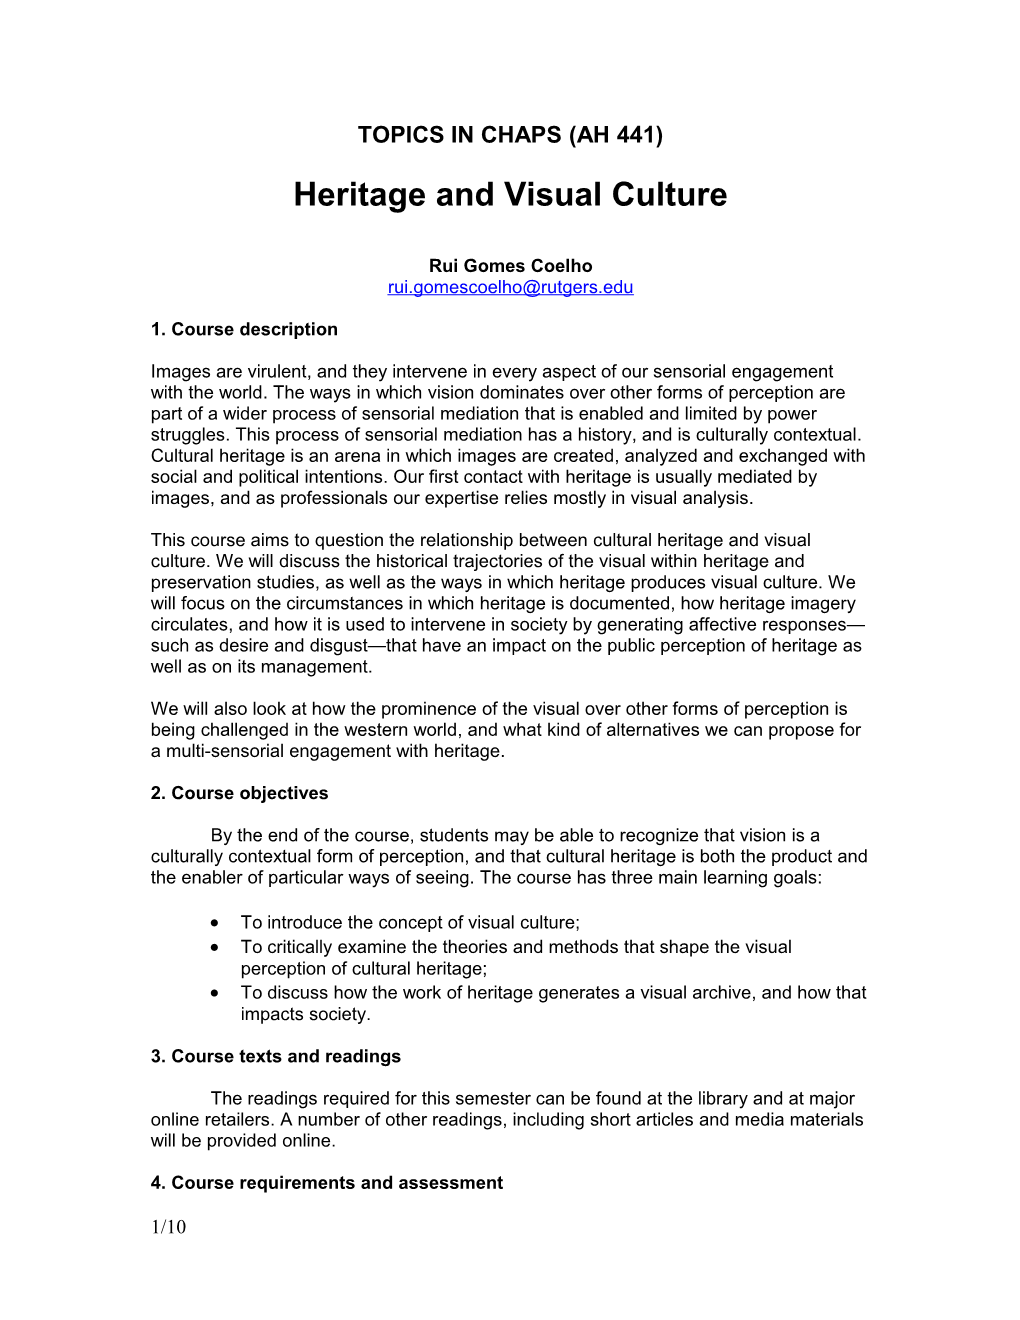 Heritage and Visual Culture